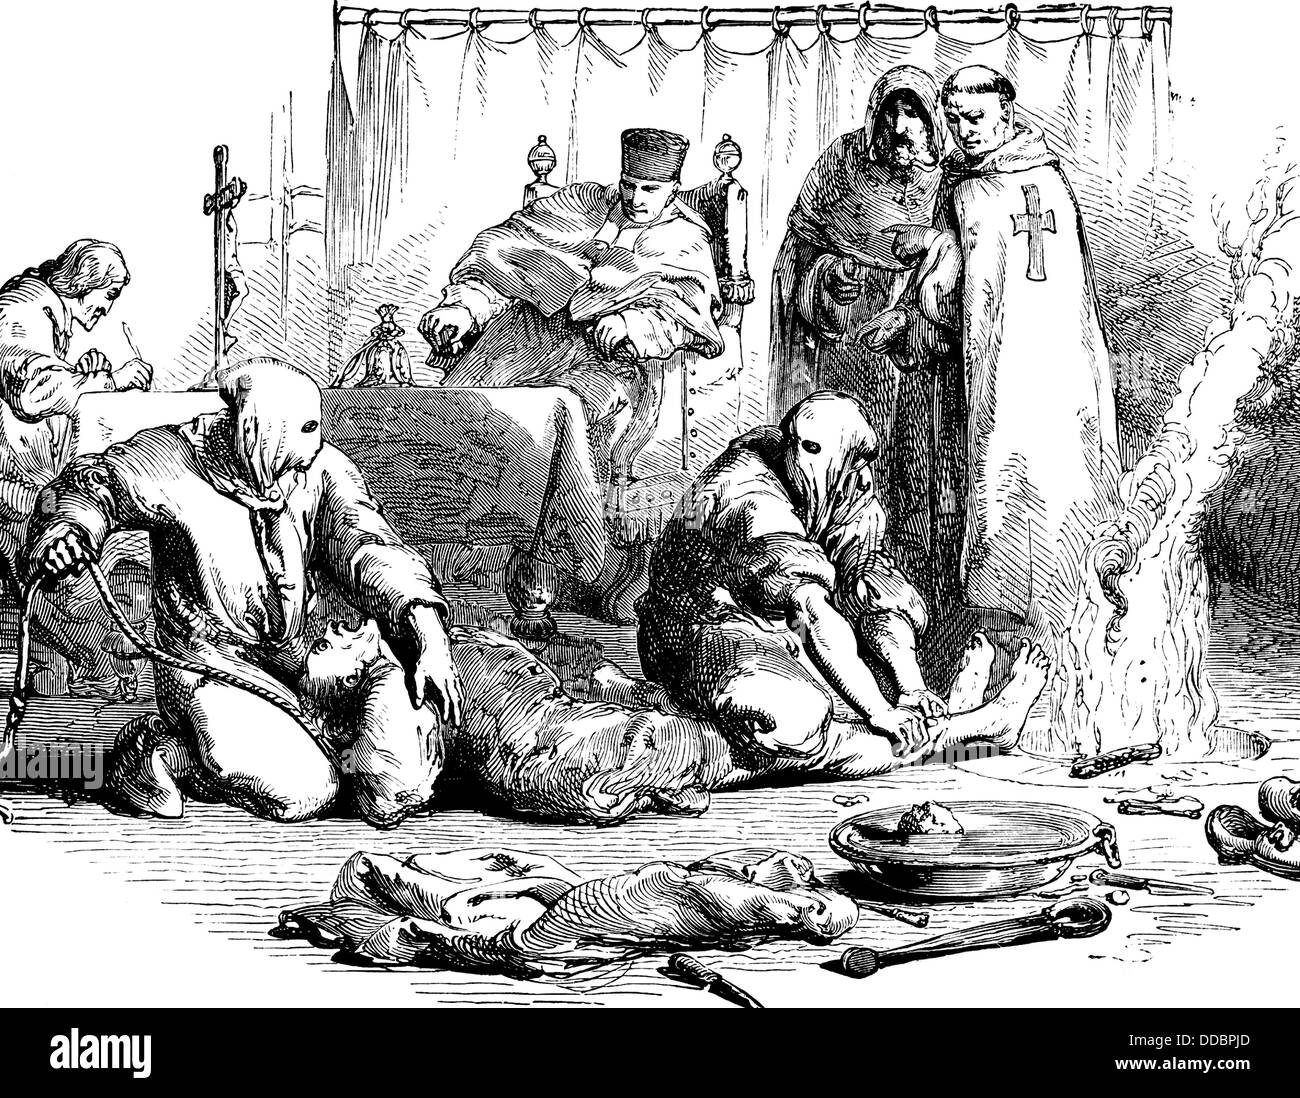 Inquisition, the cruel torture methods of the Church in the 16th century; Inquisition, Stock Photo